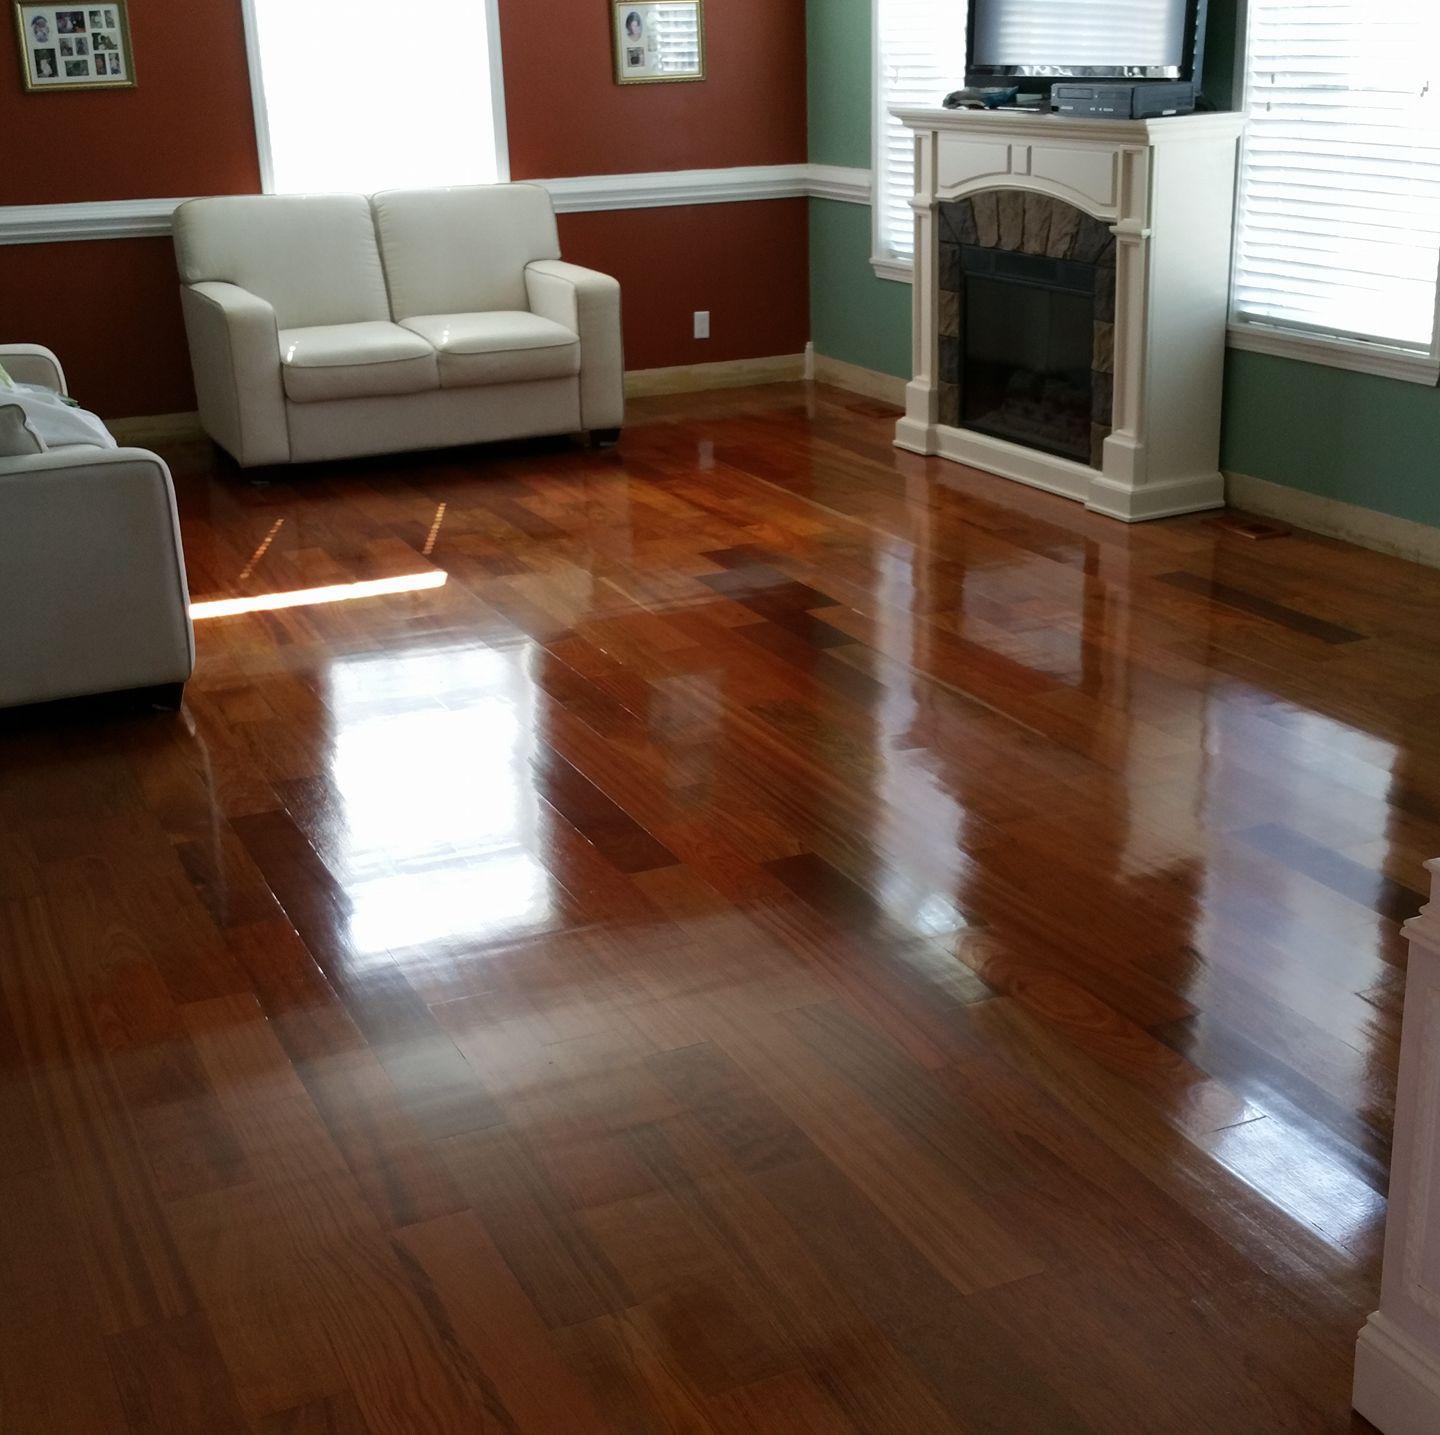 Cape Fear Flooring Inc. is your premier source for top-quality flooring in Wilmington, NC. With years of experience, we are the go-to flooring and installation supplier in the area. From hardwood installation, finishing, and maintenance to ceramic tile, carpet, and LVP, we handle it all. Whether you need help with subfloors or baseboards, our team is here to deliver exceptional results. Contact us today for all your flooring needs!